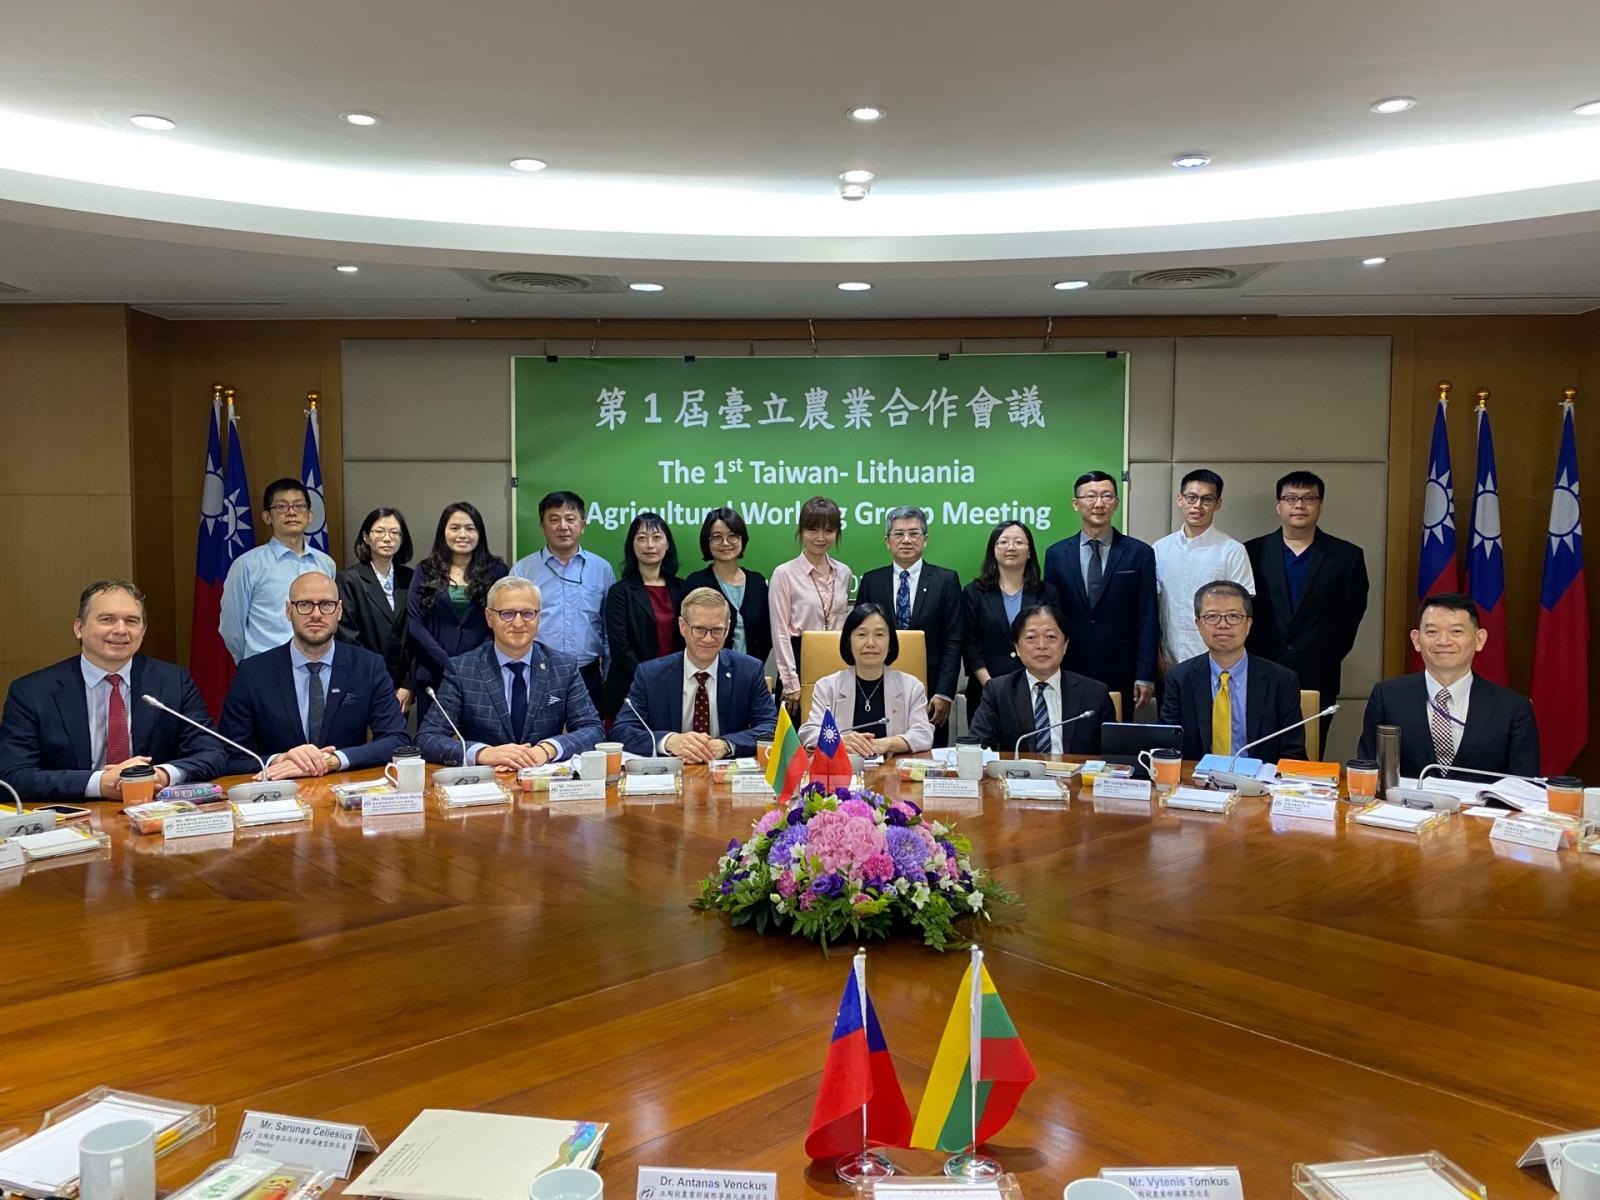 A group photo taken at the 1st Taiwan-Lithuania Agricultural Working Group Meeting.